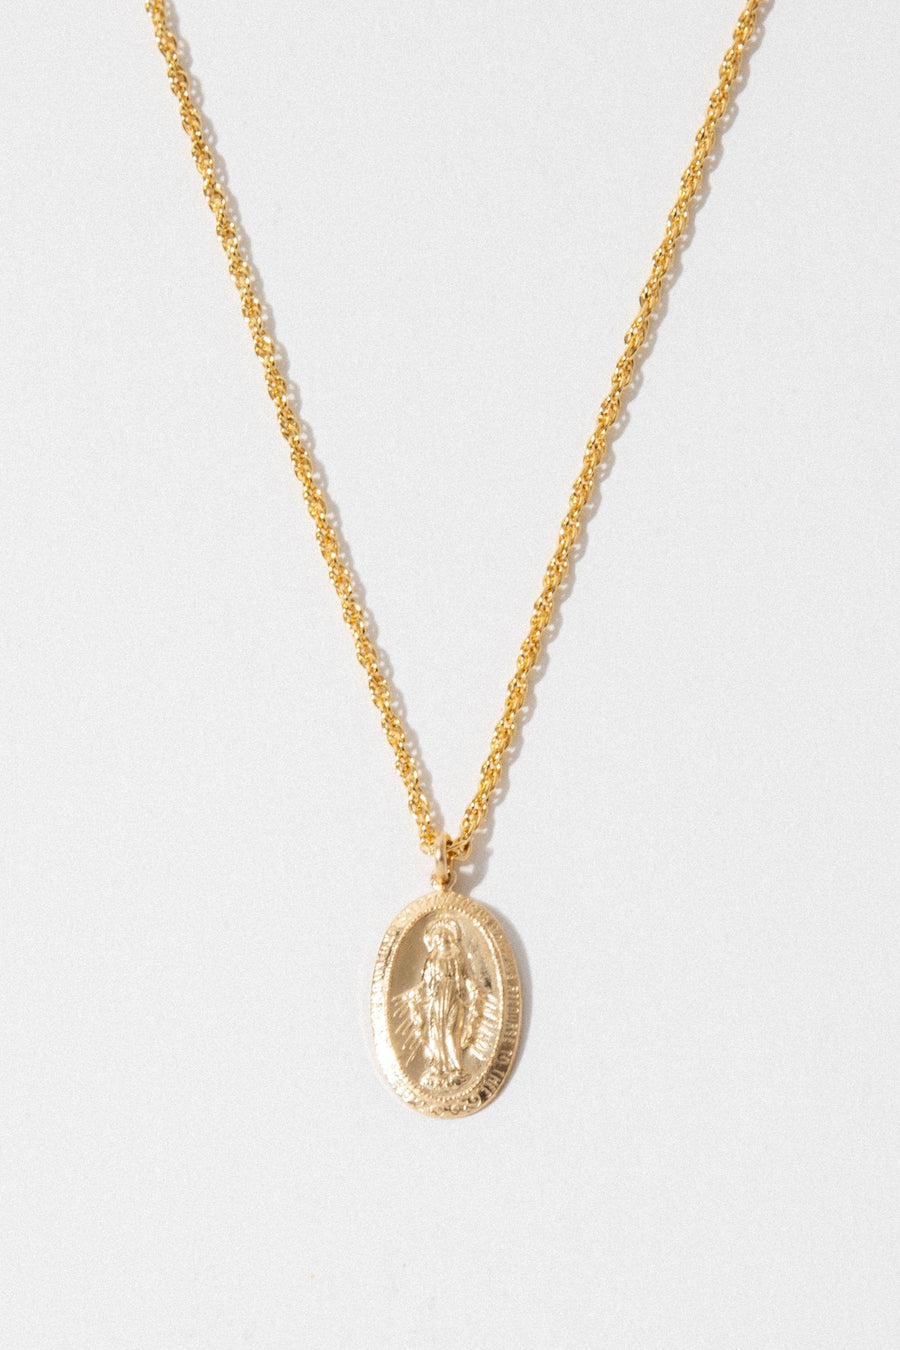 CGM Jewelry Gold / 18 Inches The Mary Necklace